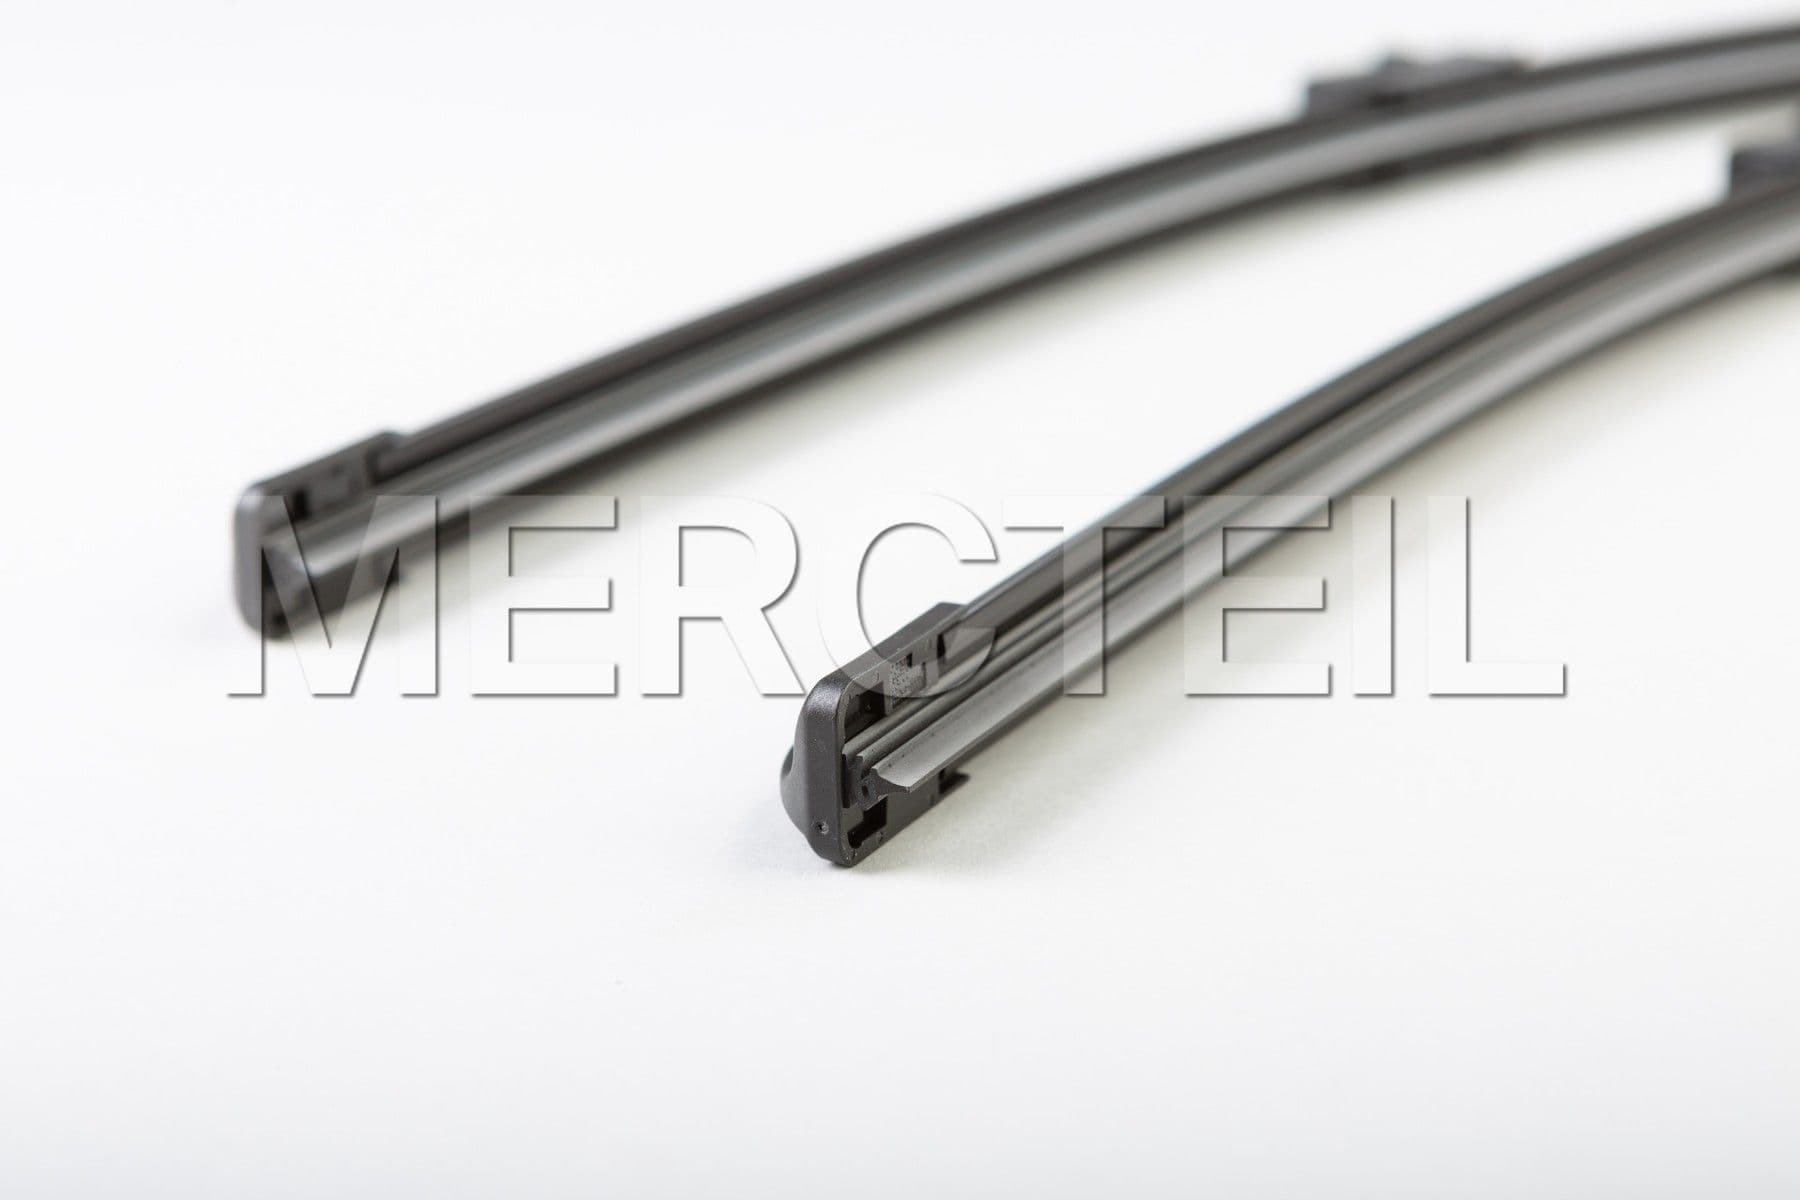 C Class Coupe Wiper Blades Genuine Mercedes Benz Accessories (part number: A2048201300)